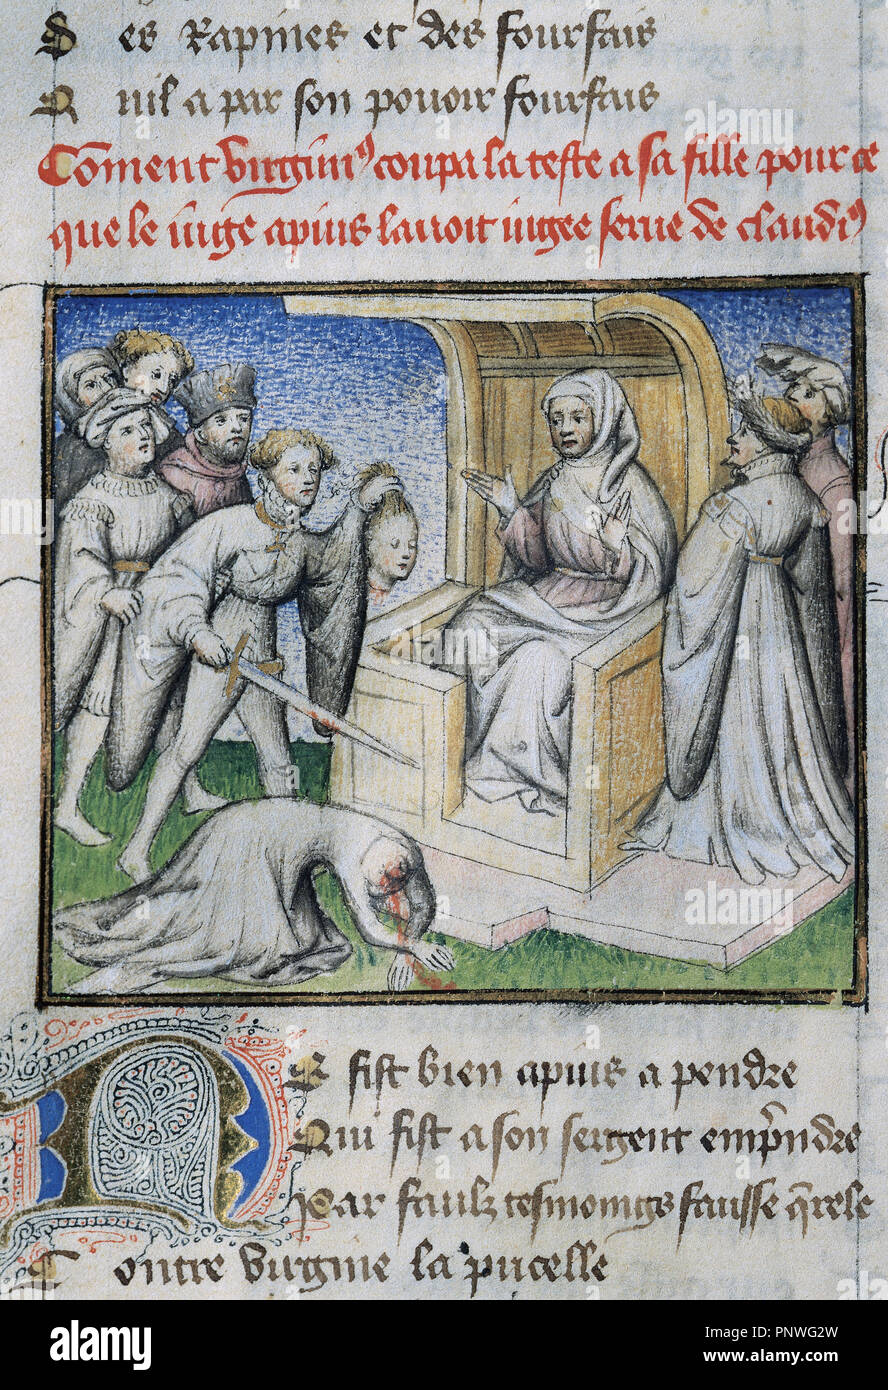 Roman de la Rose. Medieval French poem. It was started by Guillaume de  Lorris, c. 1230 but continued only some 40 years later by Jean de Meun.  Miniature of the 14th century